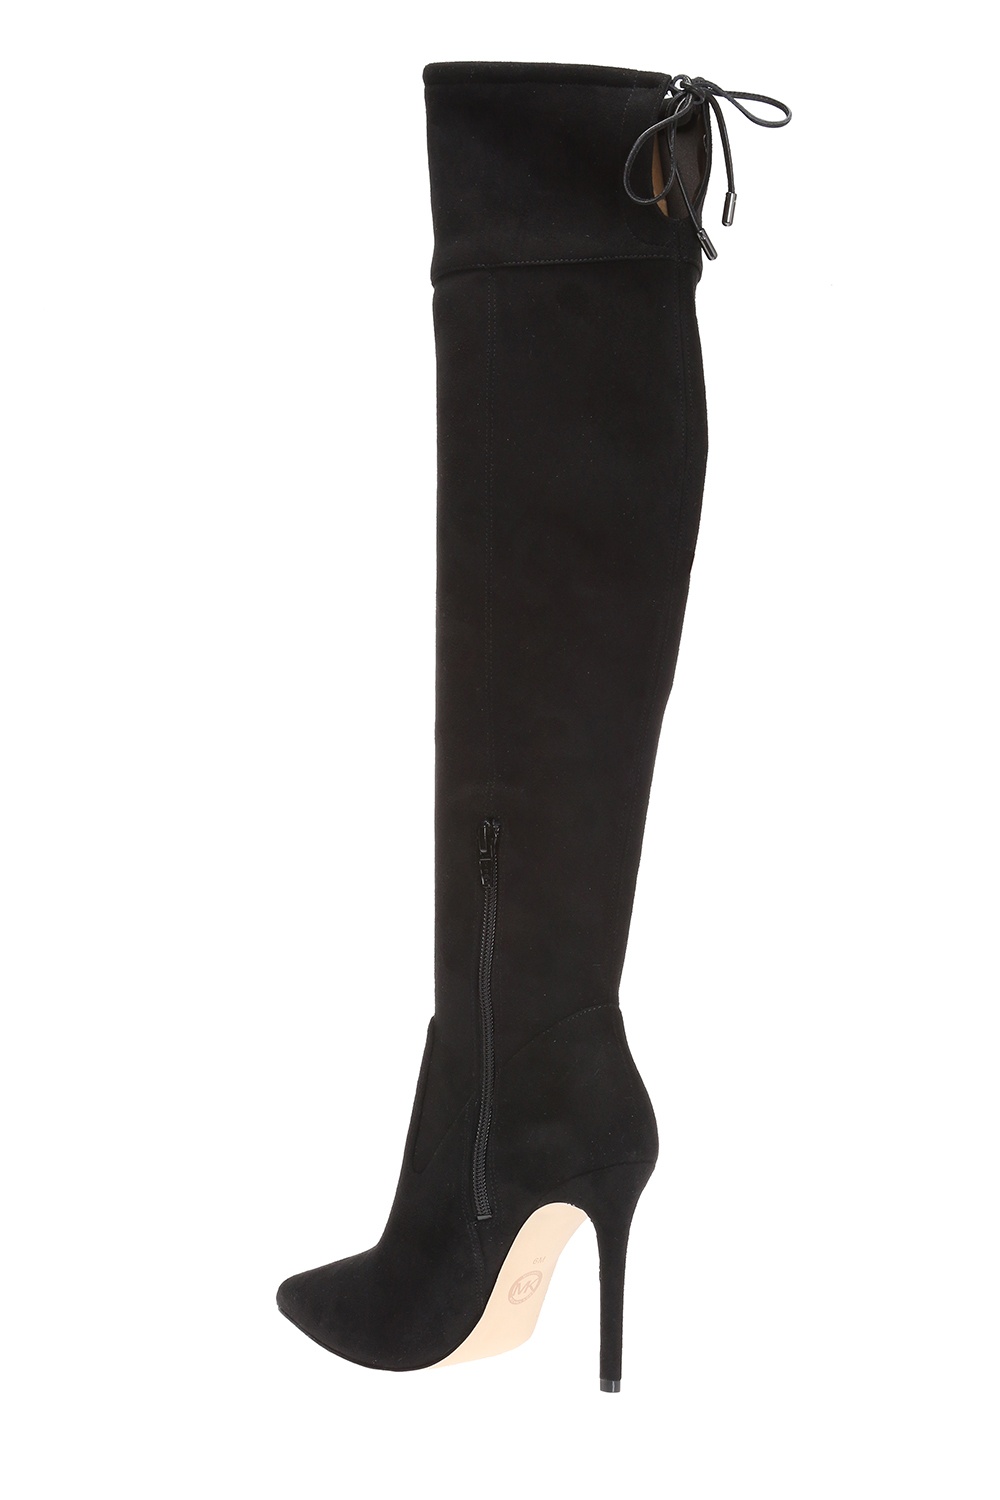 michael kors over the knee boots